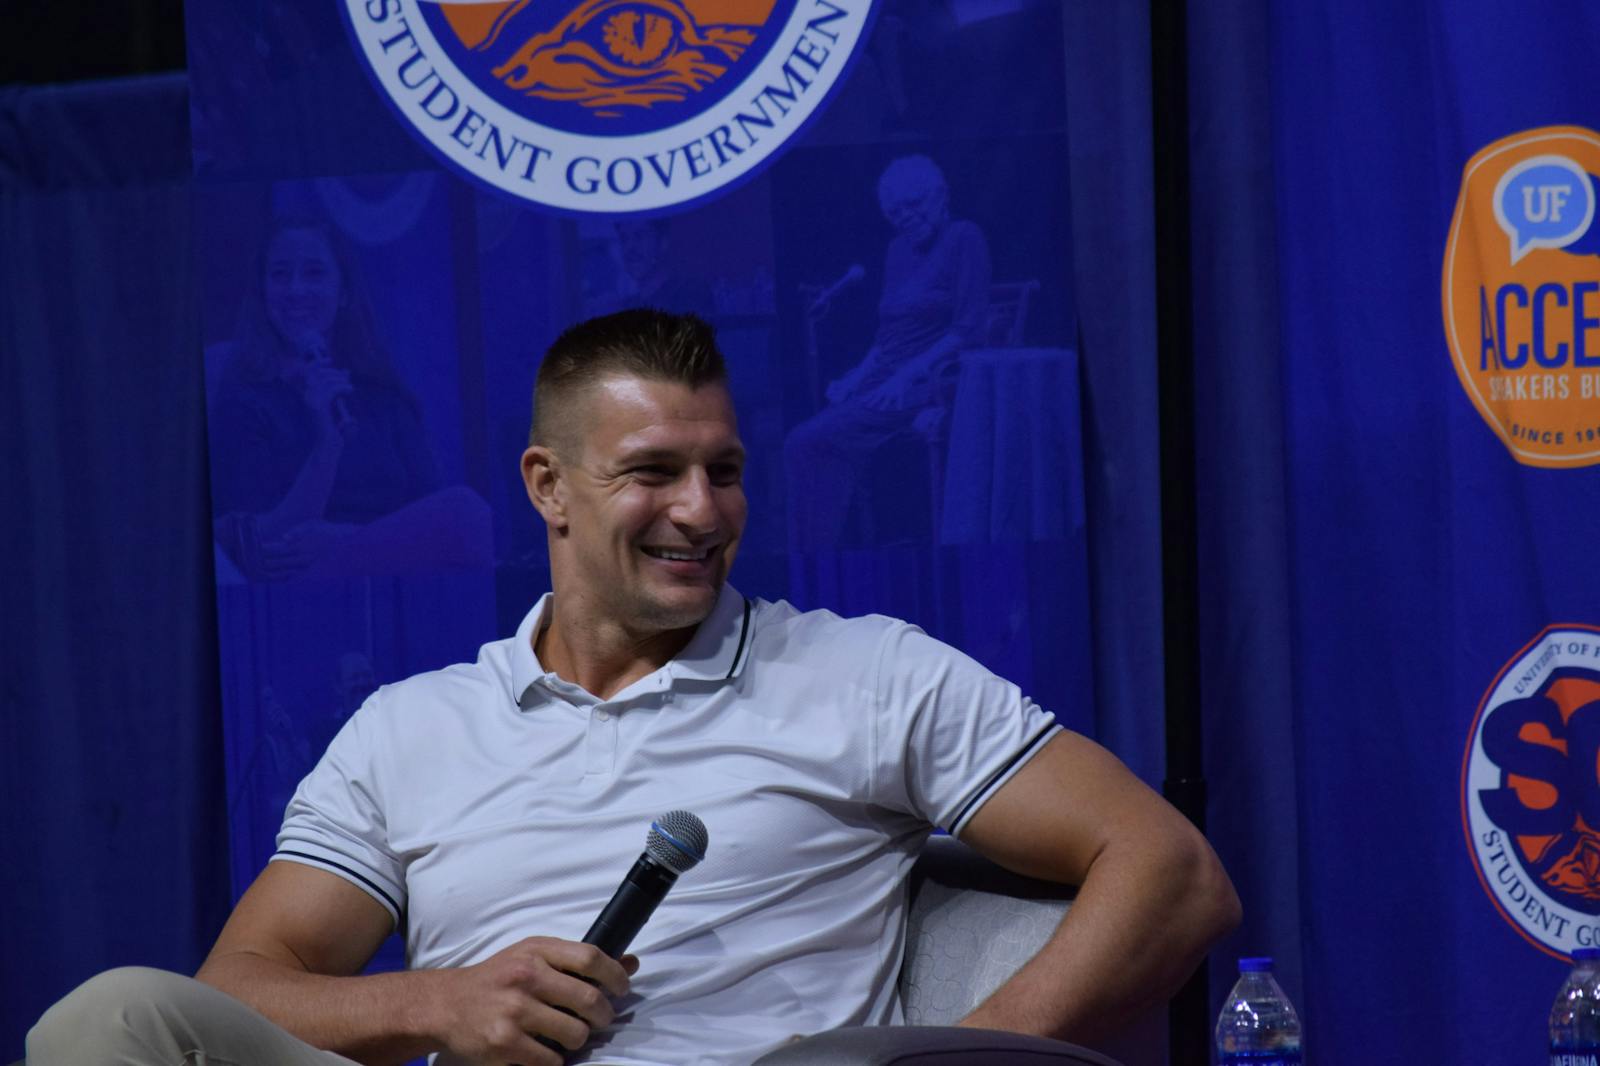 Gronk talks “Party” Reputation, College Experience - The